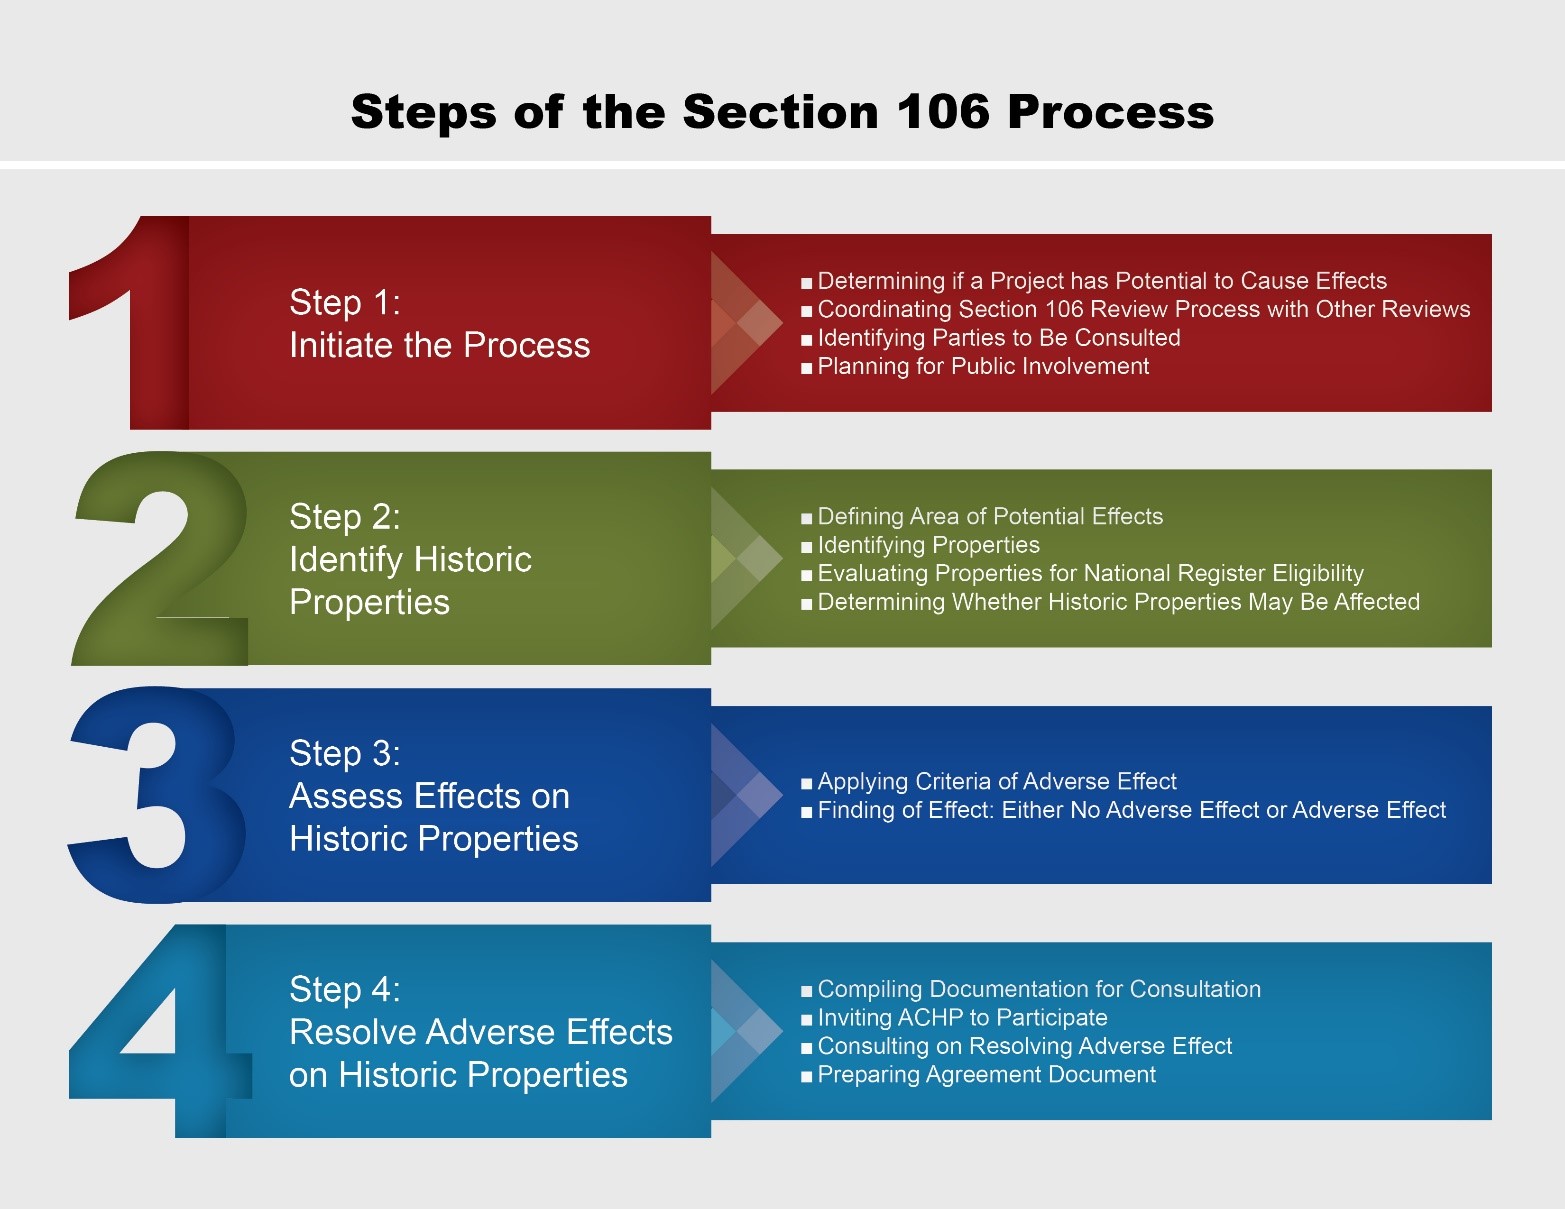 The four steps of the Section 106 process. 1. Initiate the process, 2. identify historic properties, 3. assess effects on historic properties, 4. resolve adverse effects on historic properties.